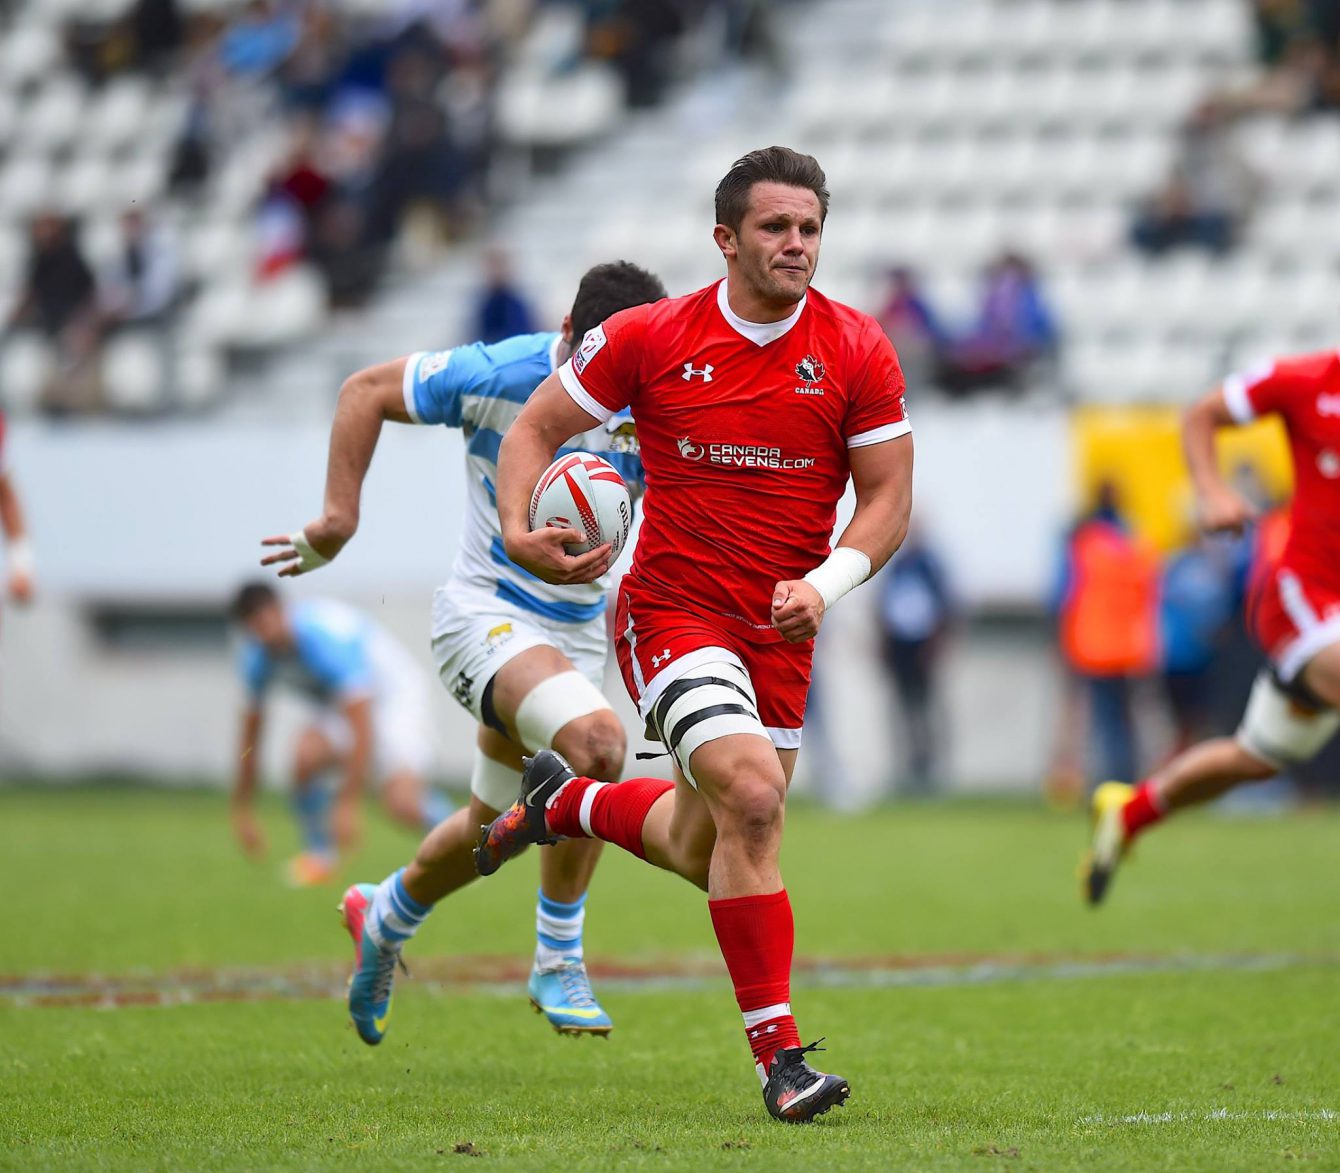 Admir Cejvanovic carries the ball in a match against Argentina at Paris Sevens 2016 (Photo: Rugby Canada).